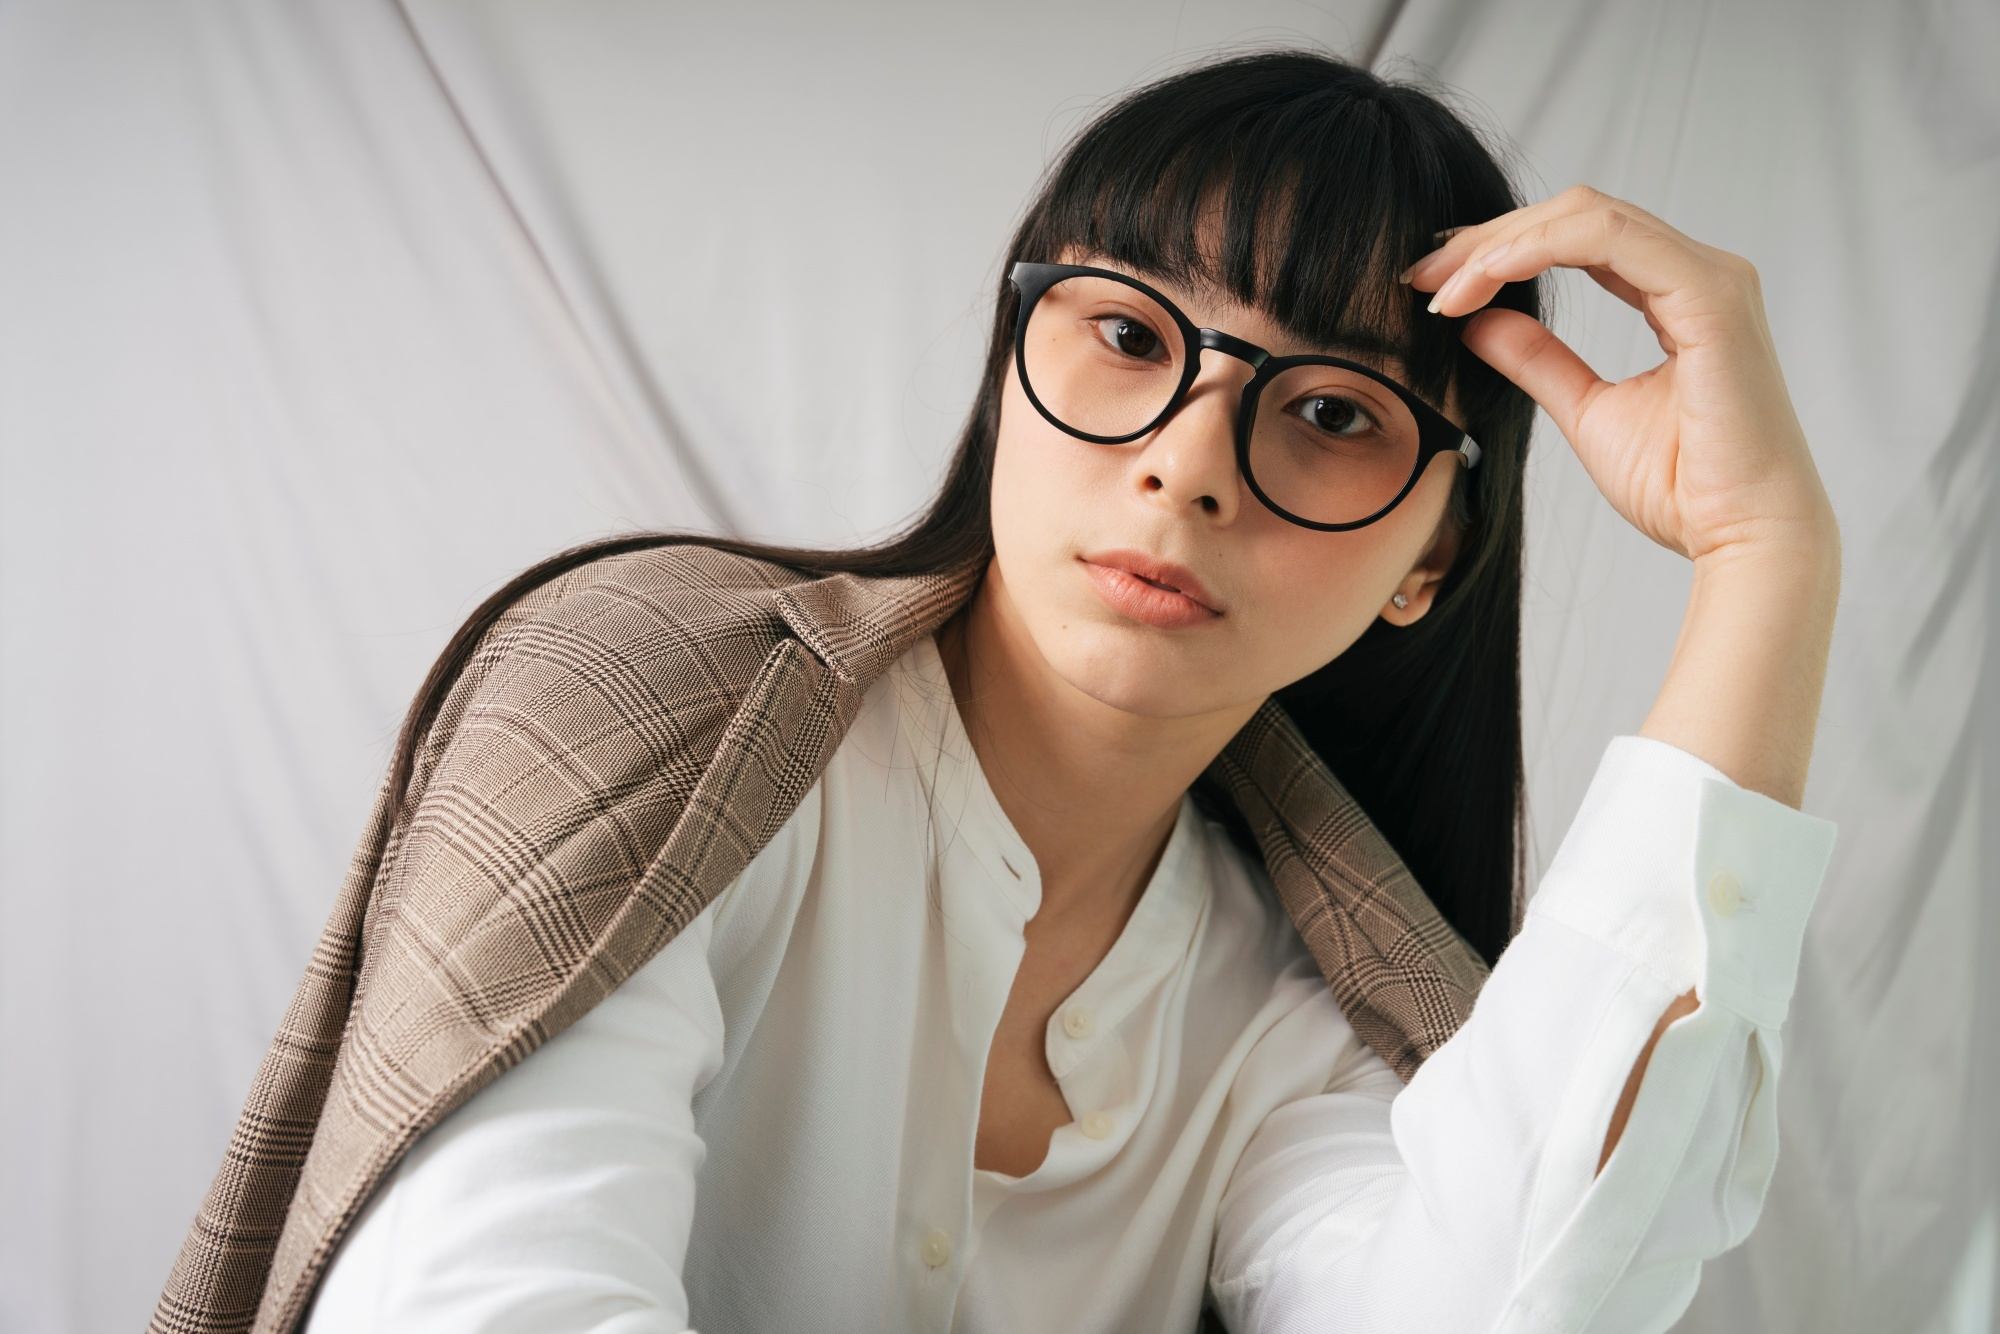 Bangs with glasses long hair with bangs shutterstock